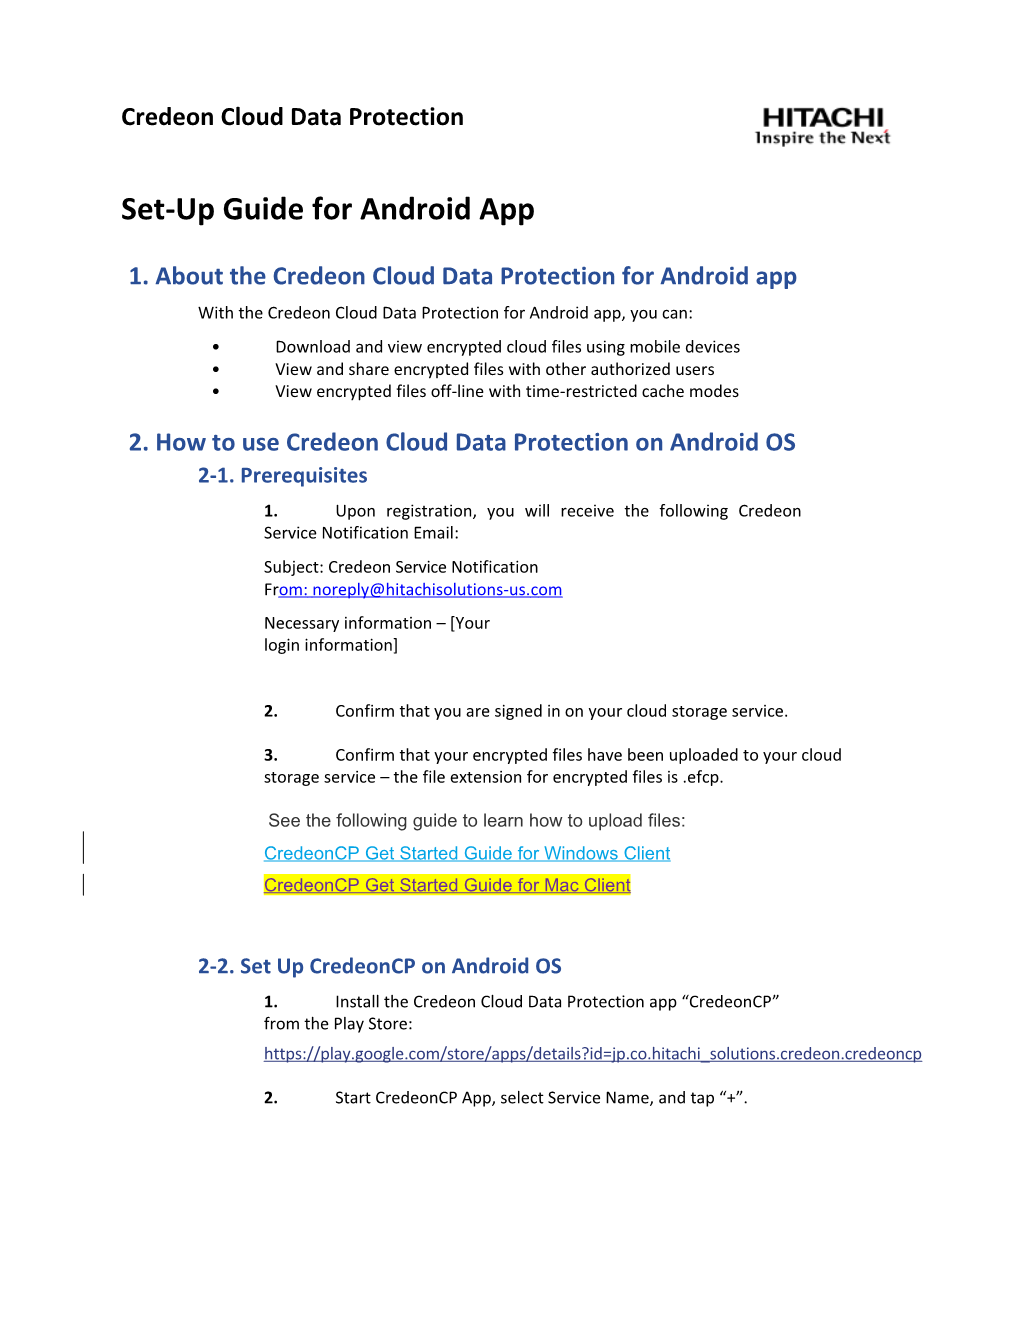 Set-Up Guide for Android App